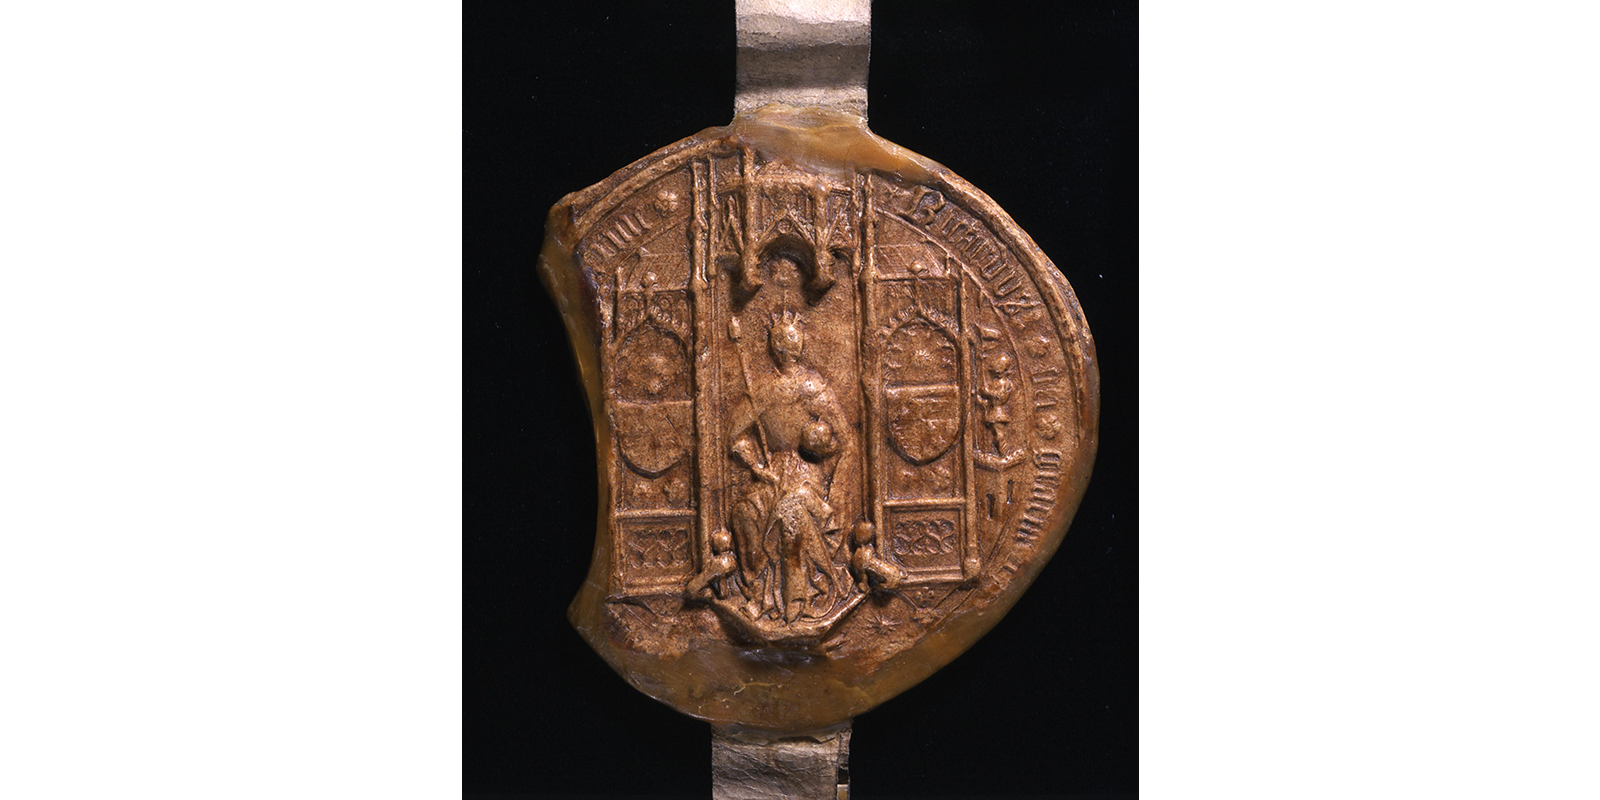 Seal of Richard III, displaying him on his throne, holding a sceptre.